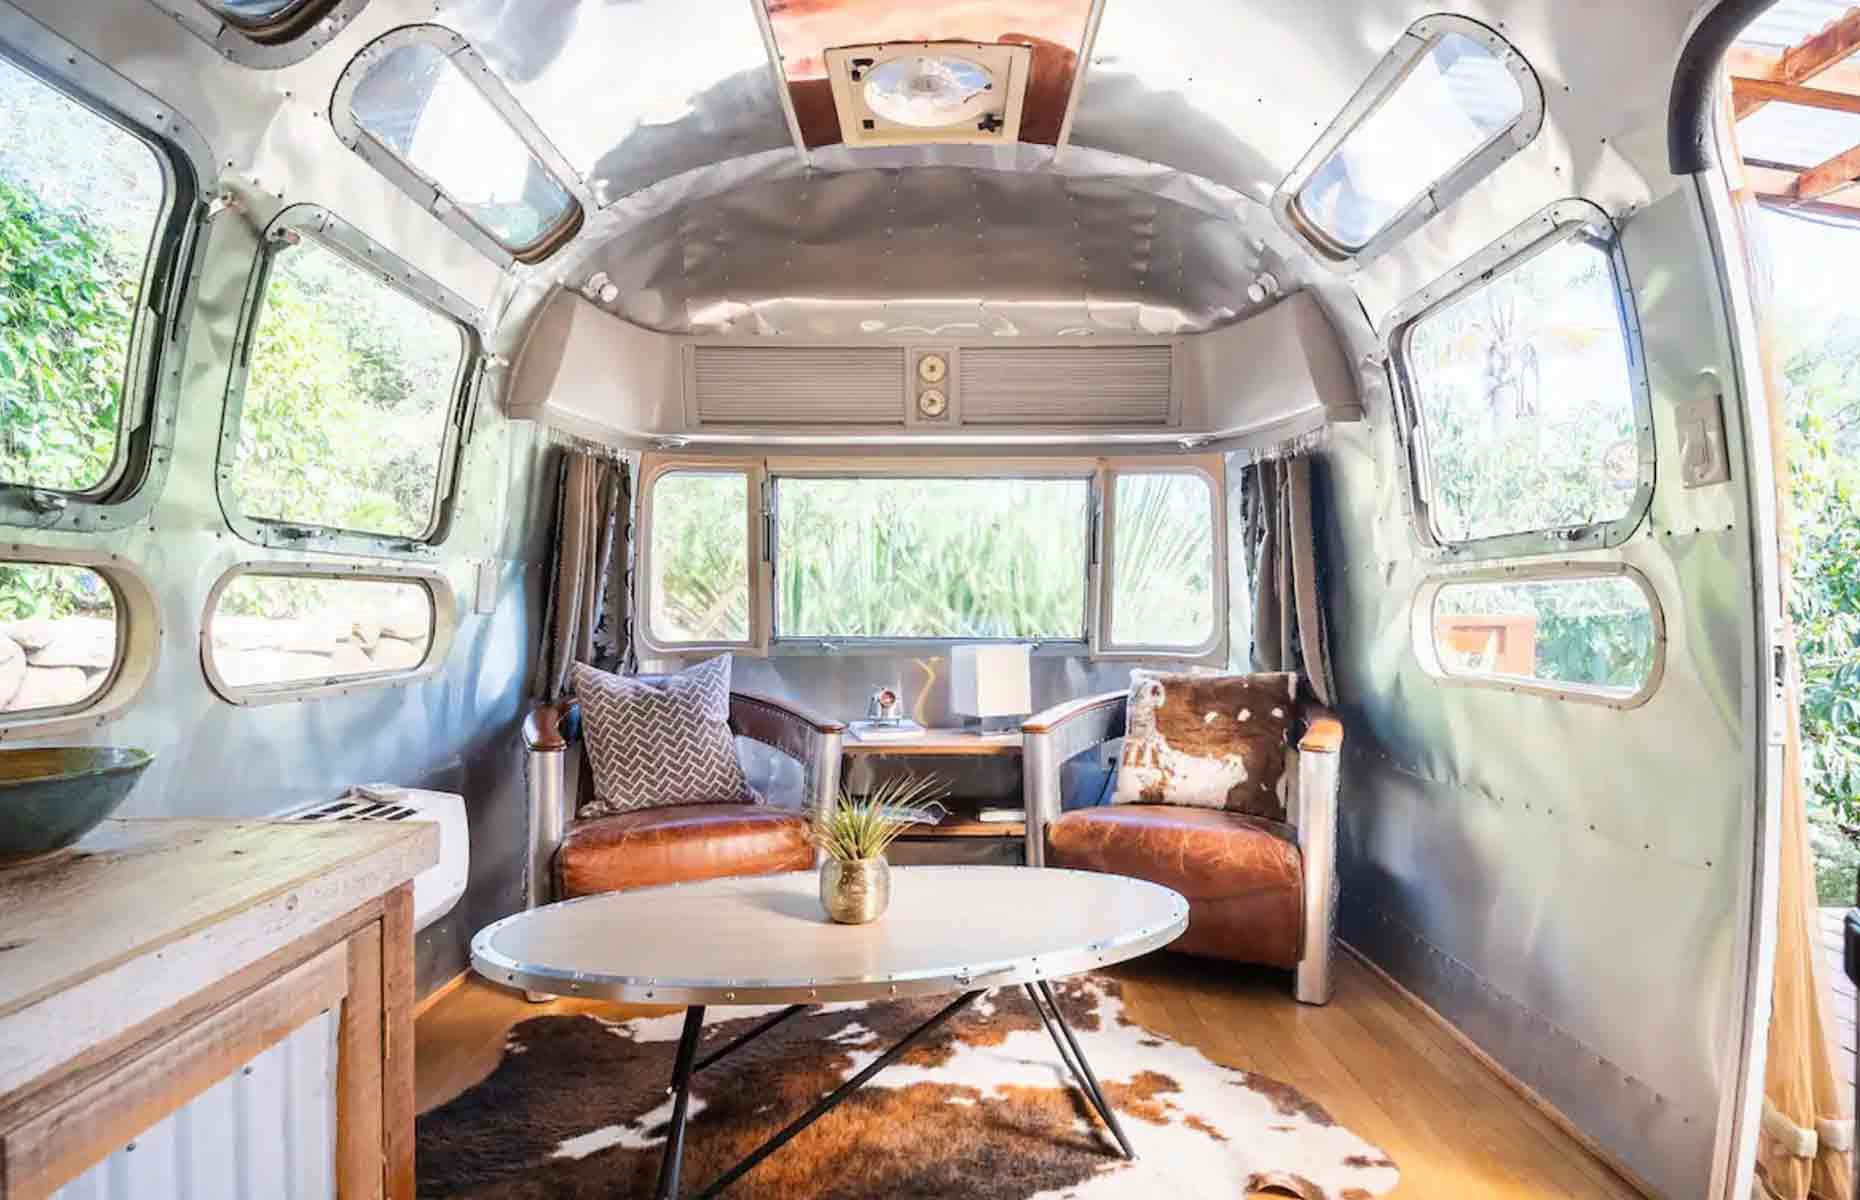 <p>At one end of the <a href="http://www.airbnb.co.uk/rooms/20068886">Airstream</a>, you'll find a double memory foam bed, while at the other there's a stylish seating area where you can kick back beneath that spectacular metal roof. Outside, a shady wooden deck with a gas firepit is the perfect place for dining alfresco.</p>  <p>There's also a separate structure containing a full bathroom and laundry facilities, alongside a beautiful garden and even a small avocado orchard. We can’t imagine ever wanting to leave this Cali hideaway!</p>